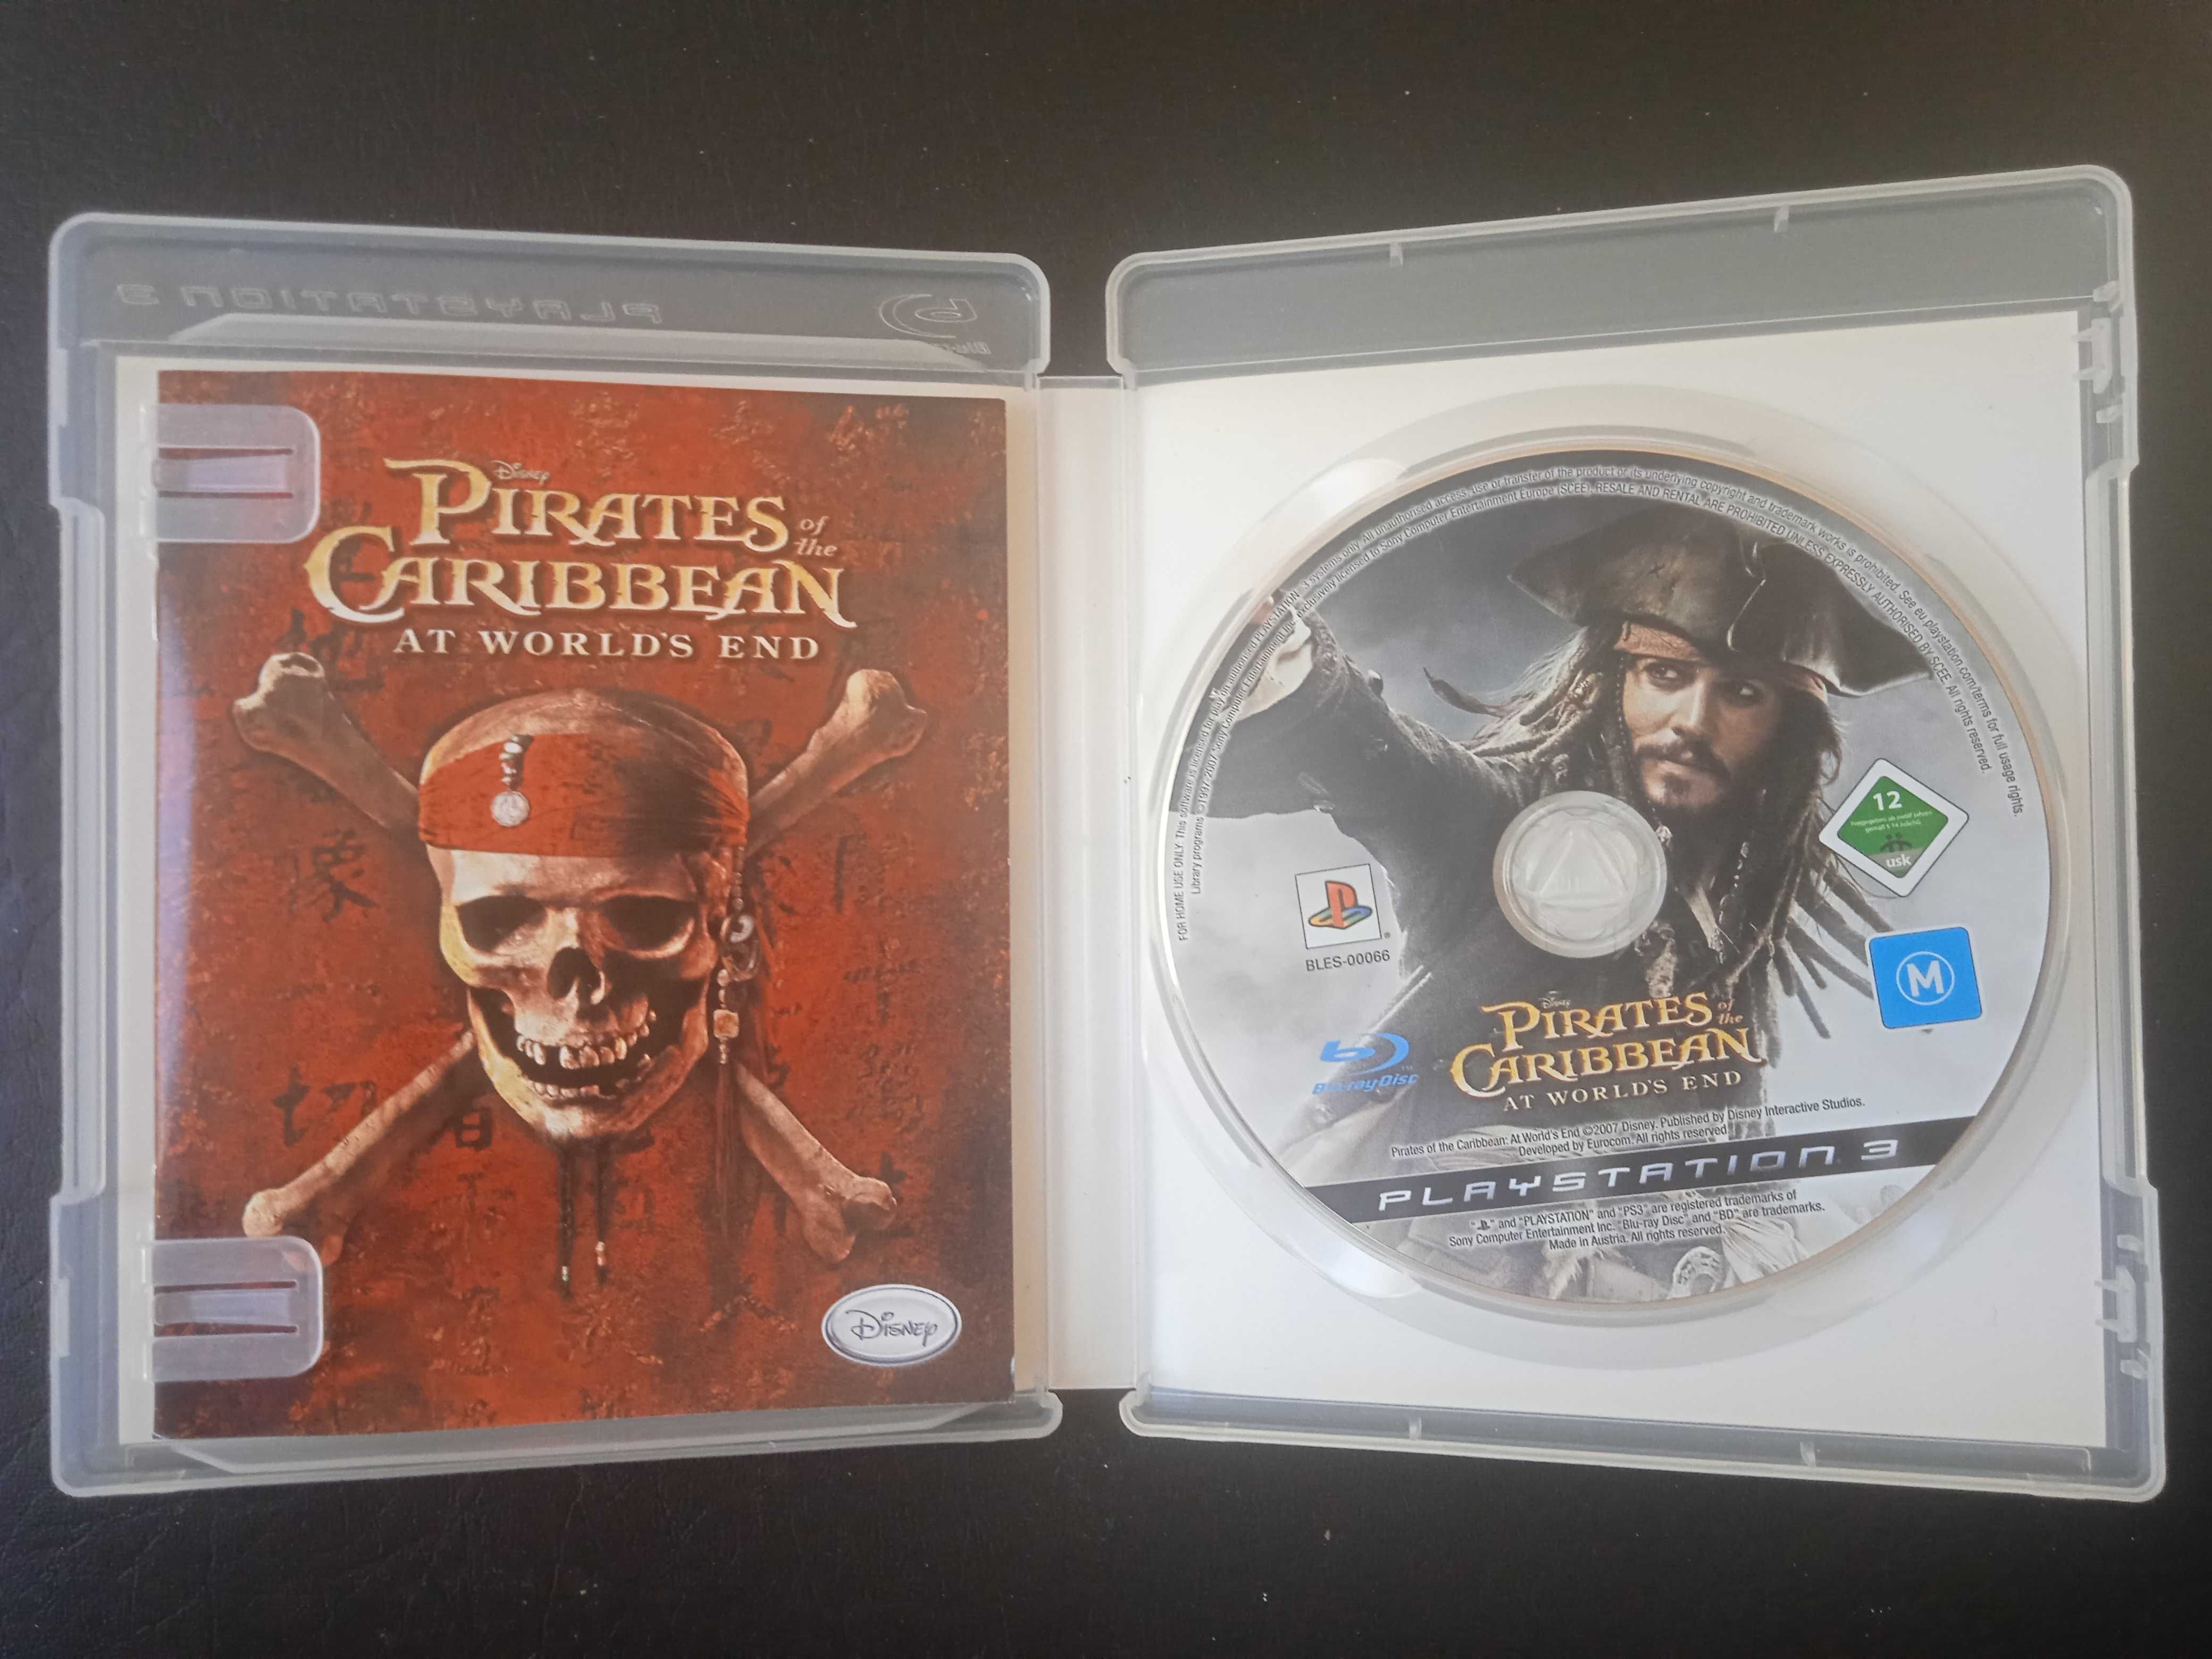 Playstation 3 / PS3  - Pirates of the Caribbean: At world's End